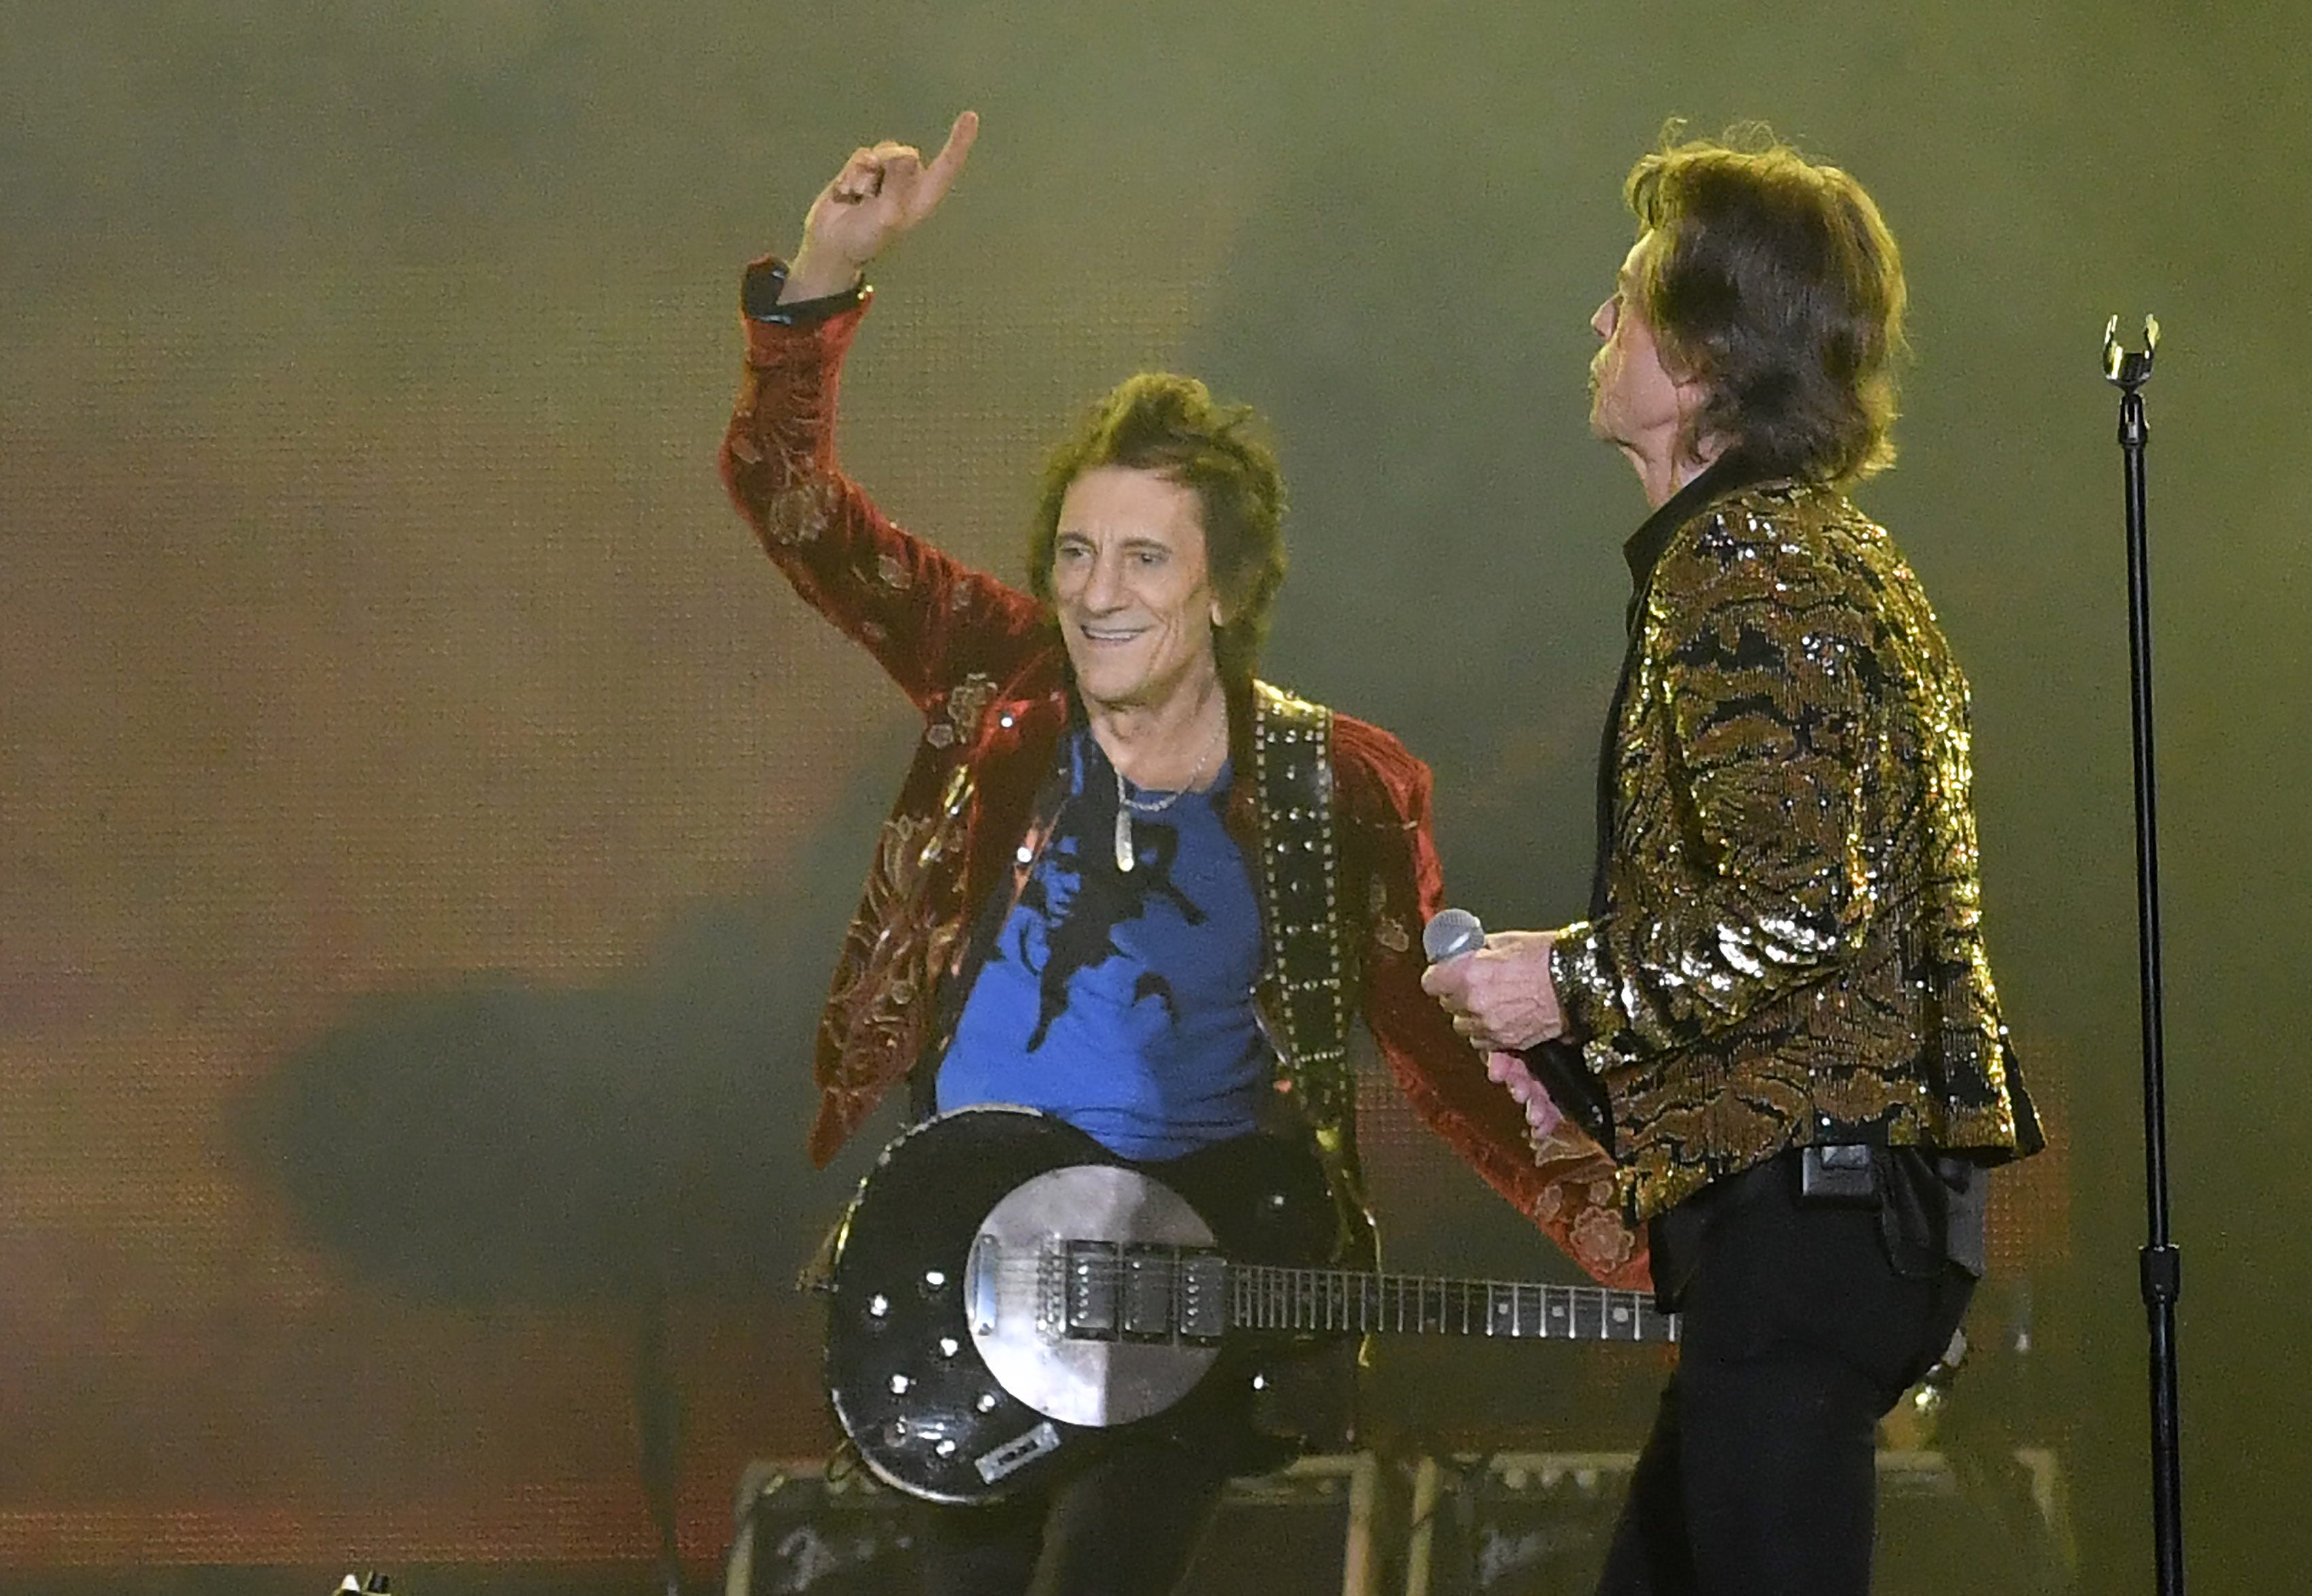 From left, Ronnie Wood and Mick Jagger of The Rolling Stones.